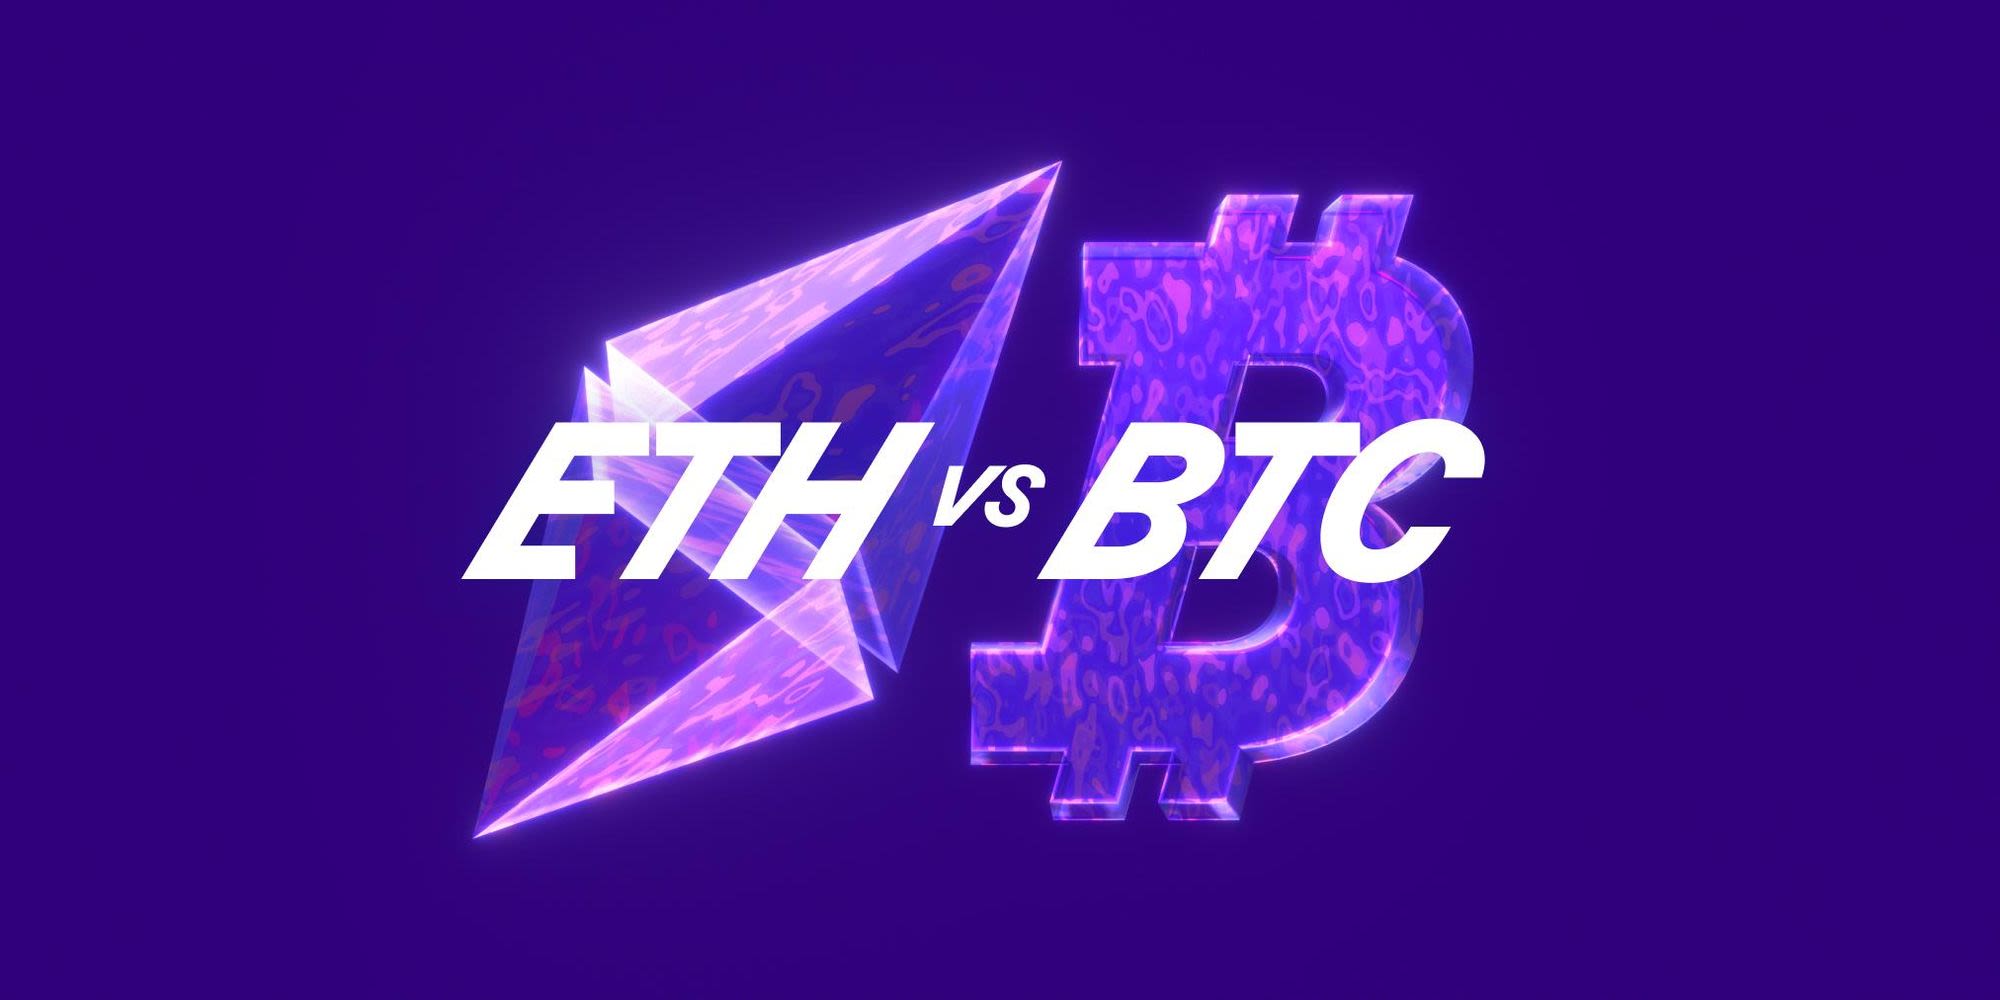 Cover Image for Ethereum vs Bitcoin: What are the differences?